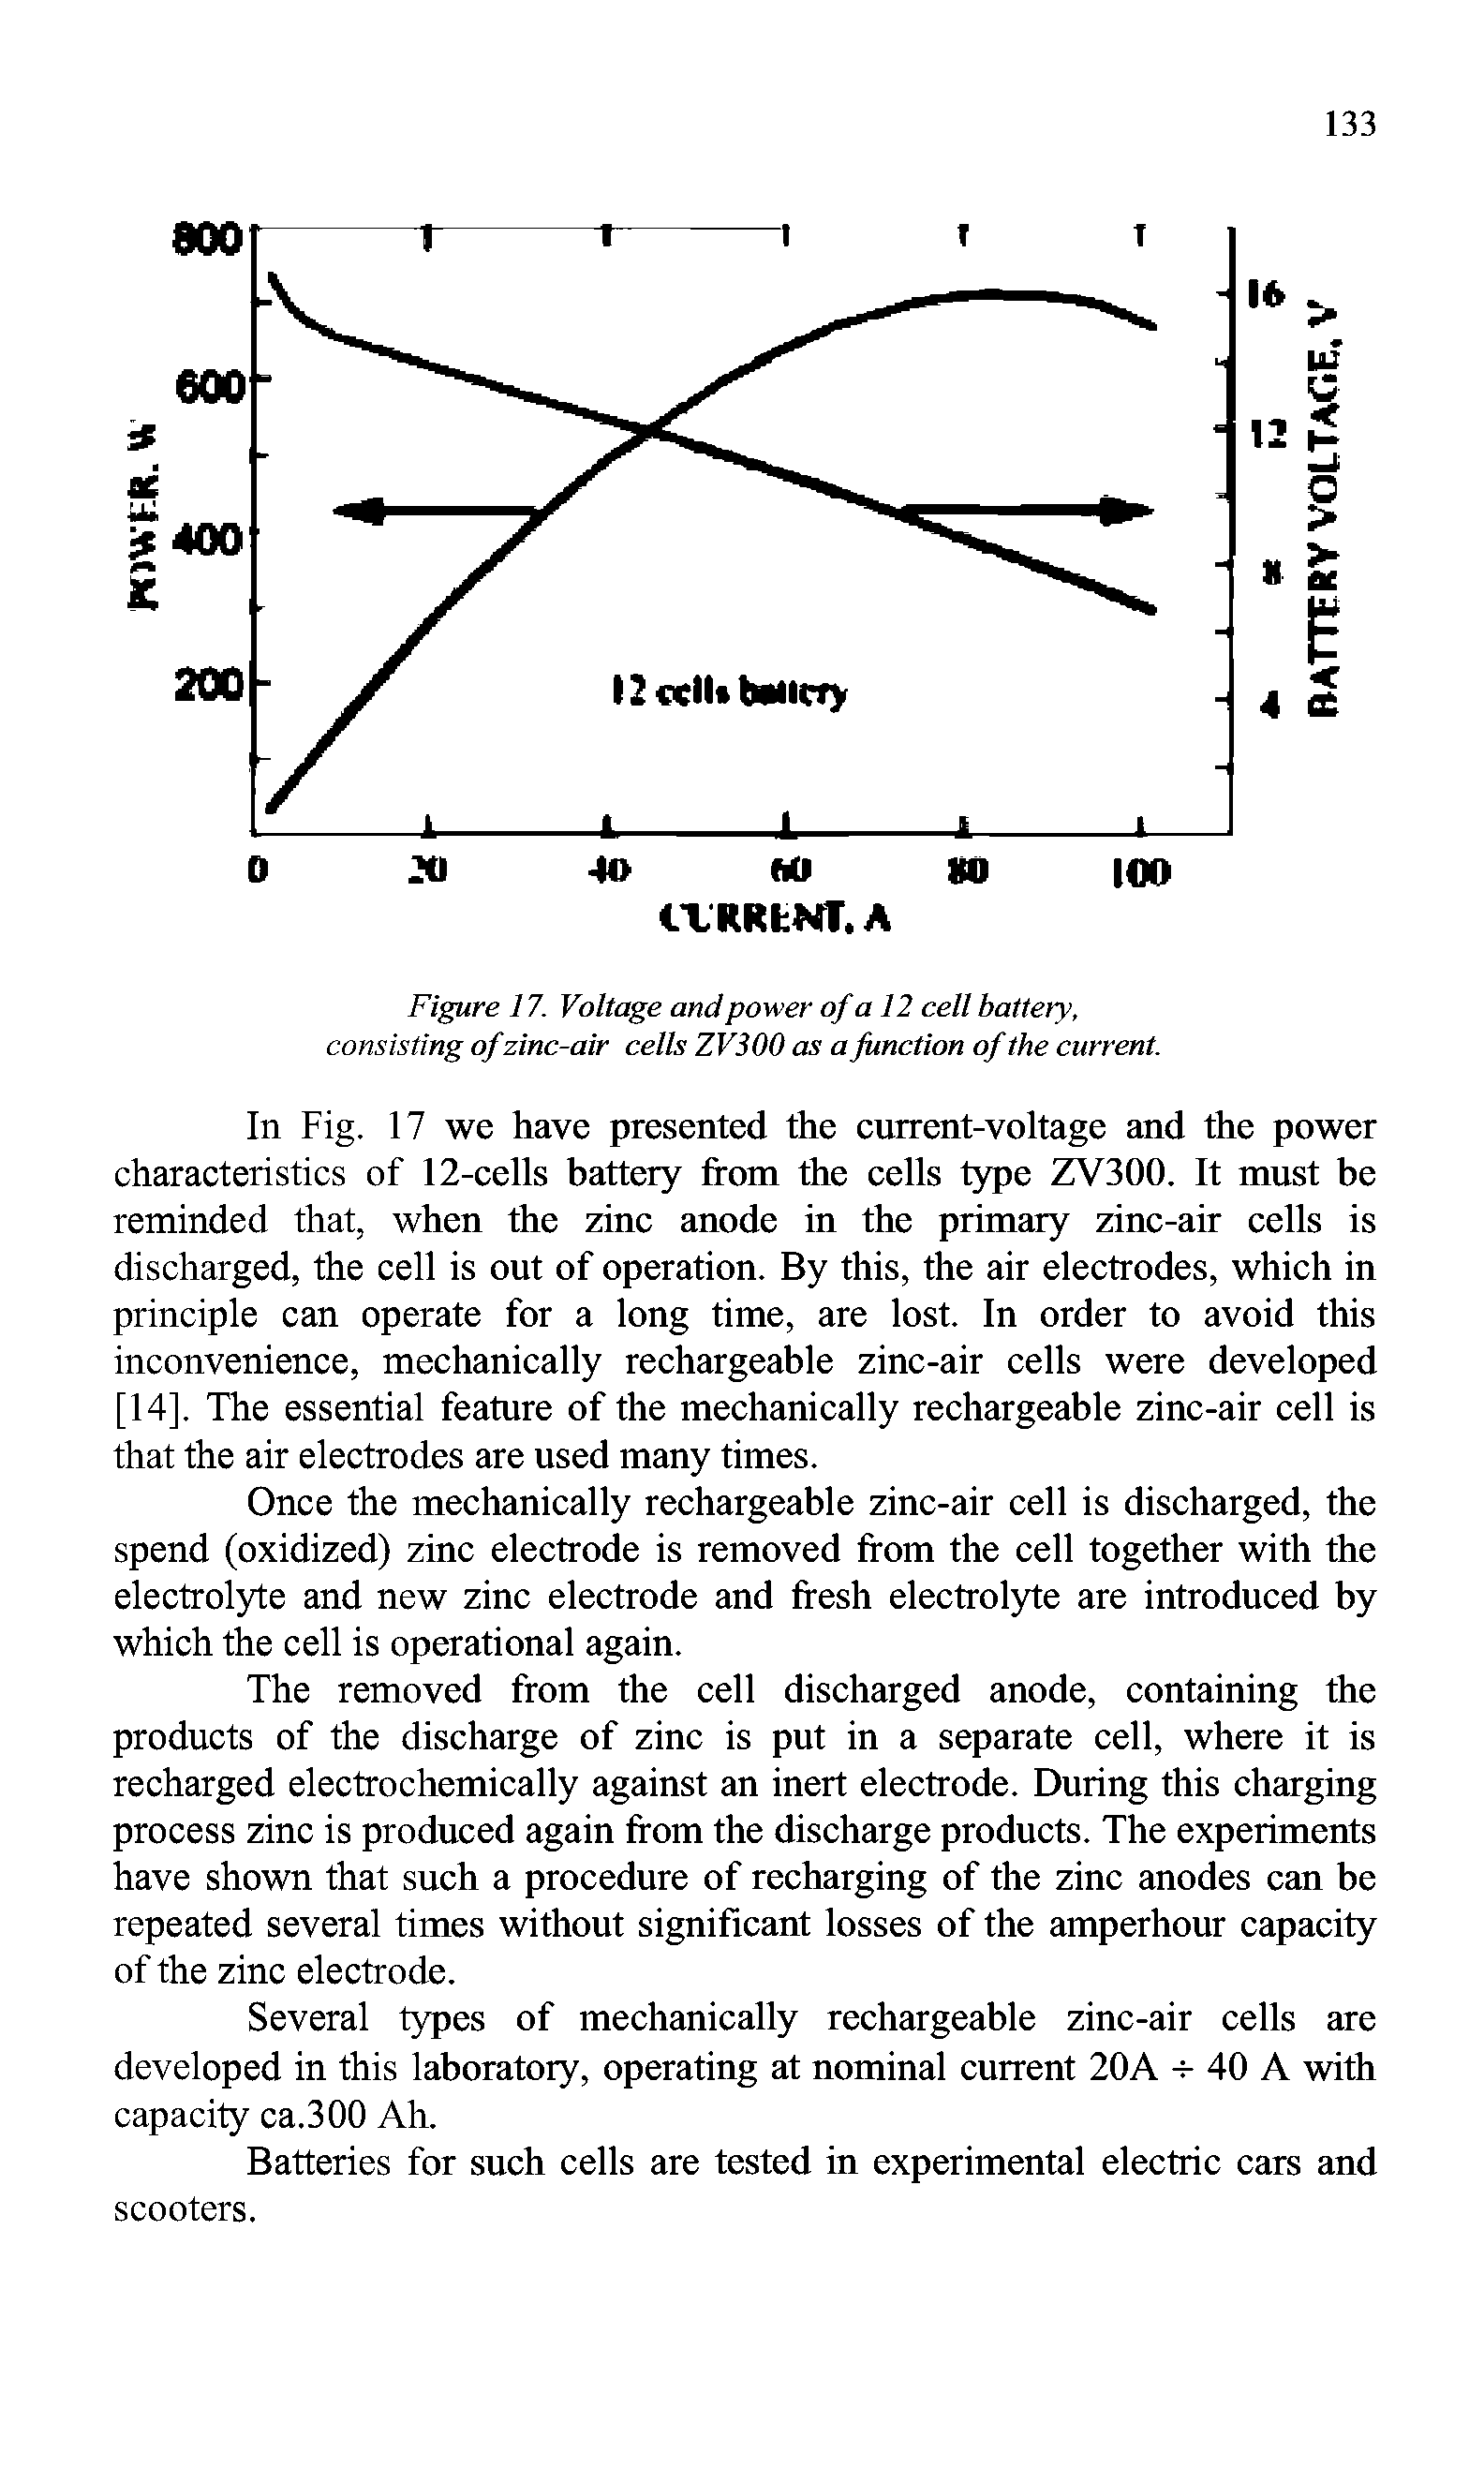 Figure 17. Voltage and power of a 12 cell battery, consisting of zinc-air cells ZV300 as a function of the current.